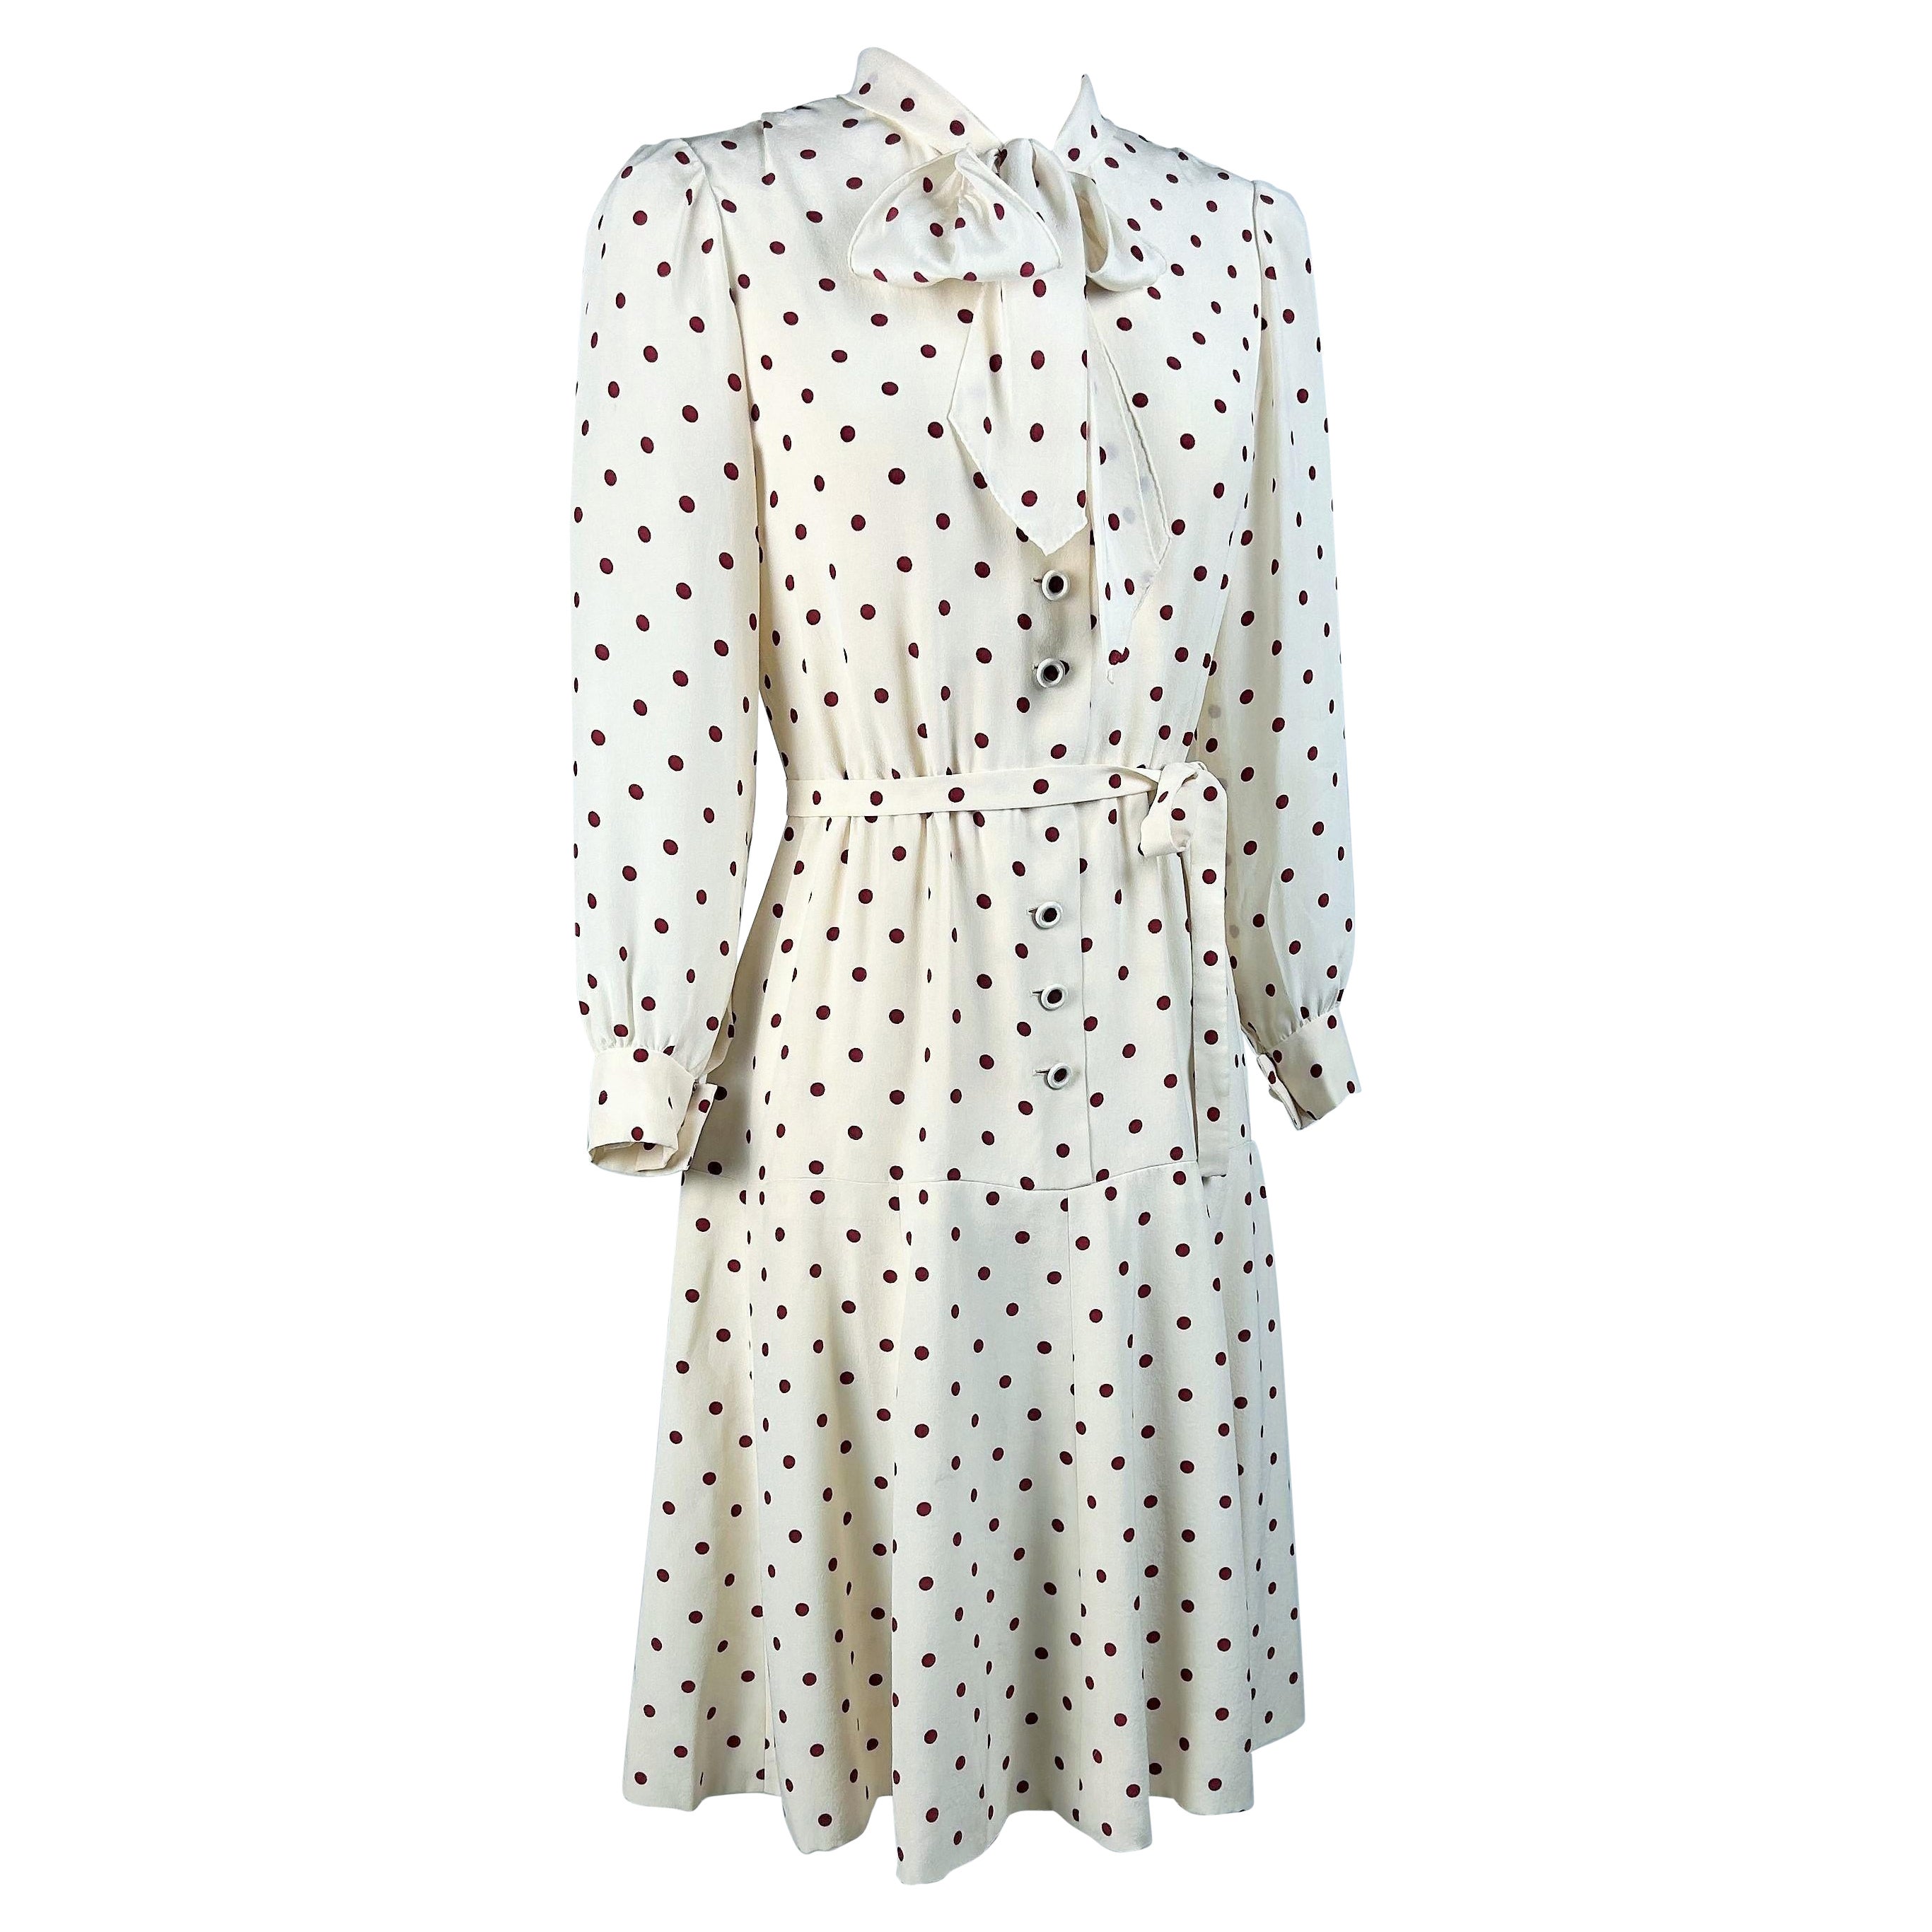 A Polka Dots crepe cocktail dress by Chanel Haute Couture numbered 59644 C. 1975 For Sale